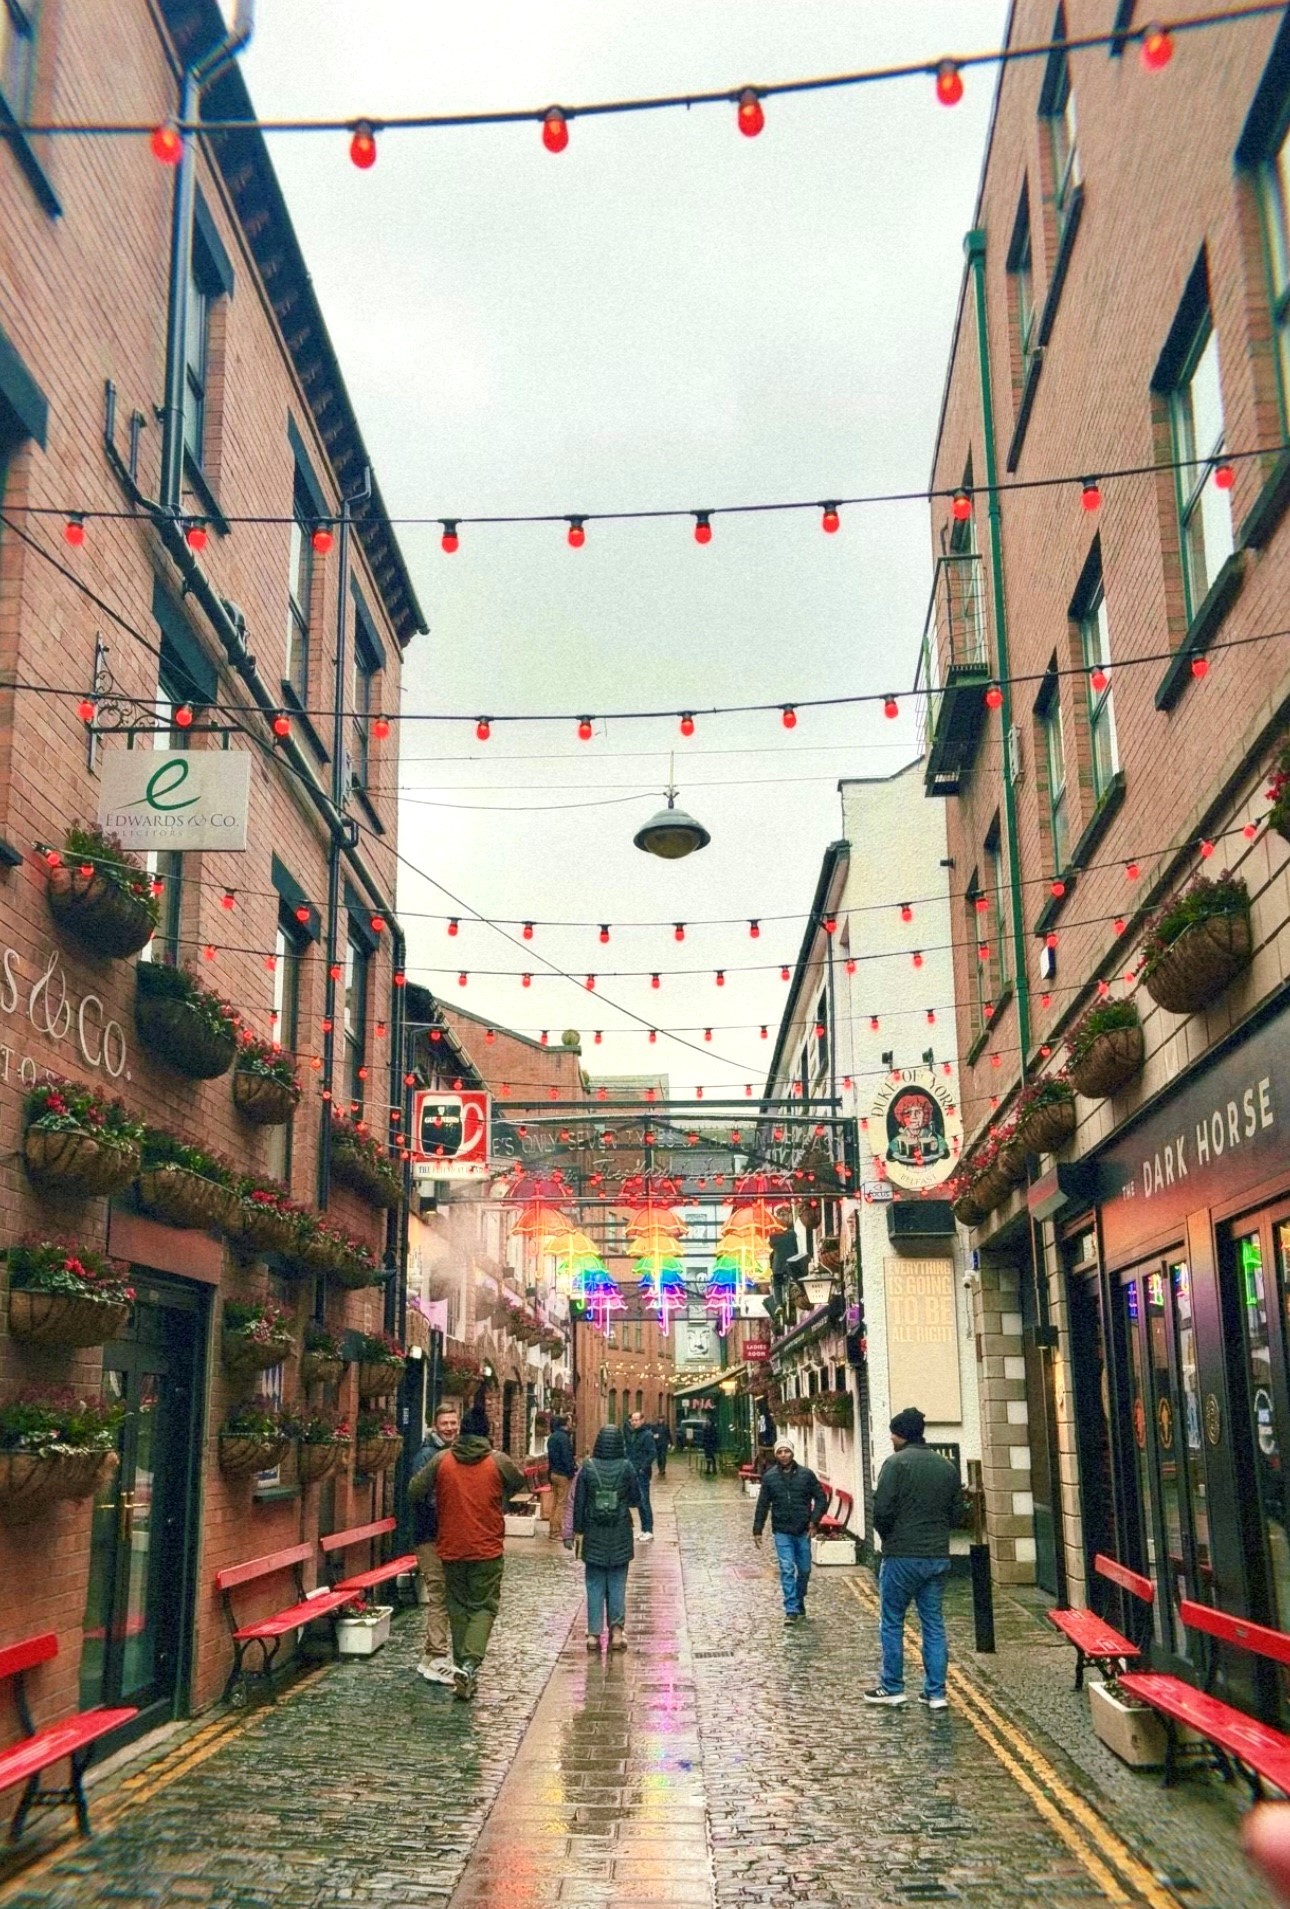 Makenna Kunz captures the essence of Belfast's historic charm in Duke of York Alleyway, blending past and present in a single frame